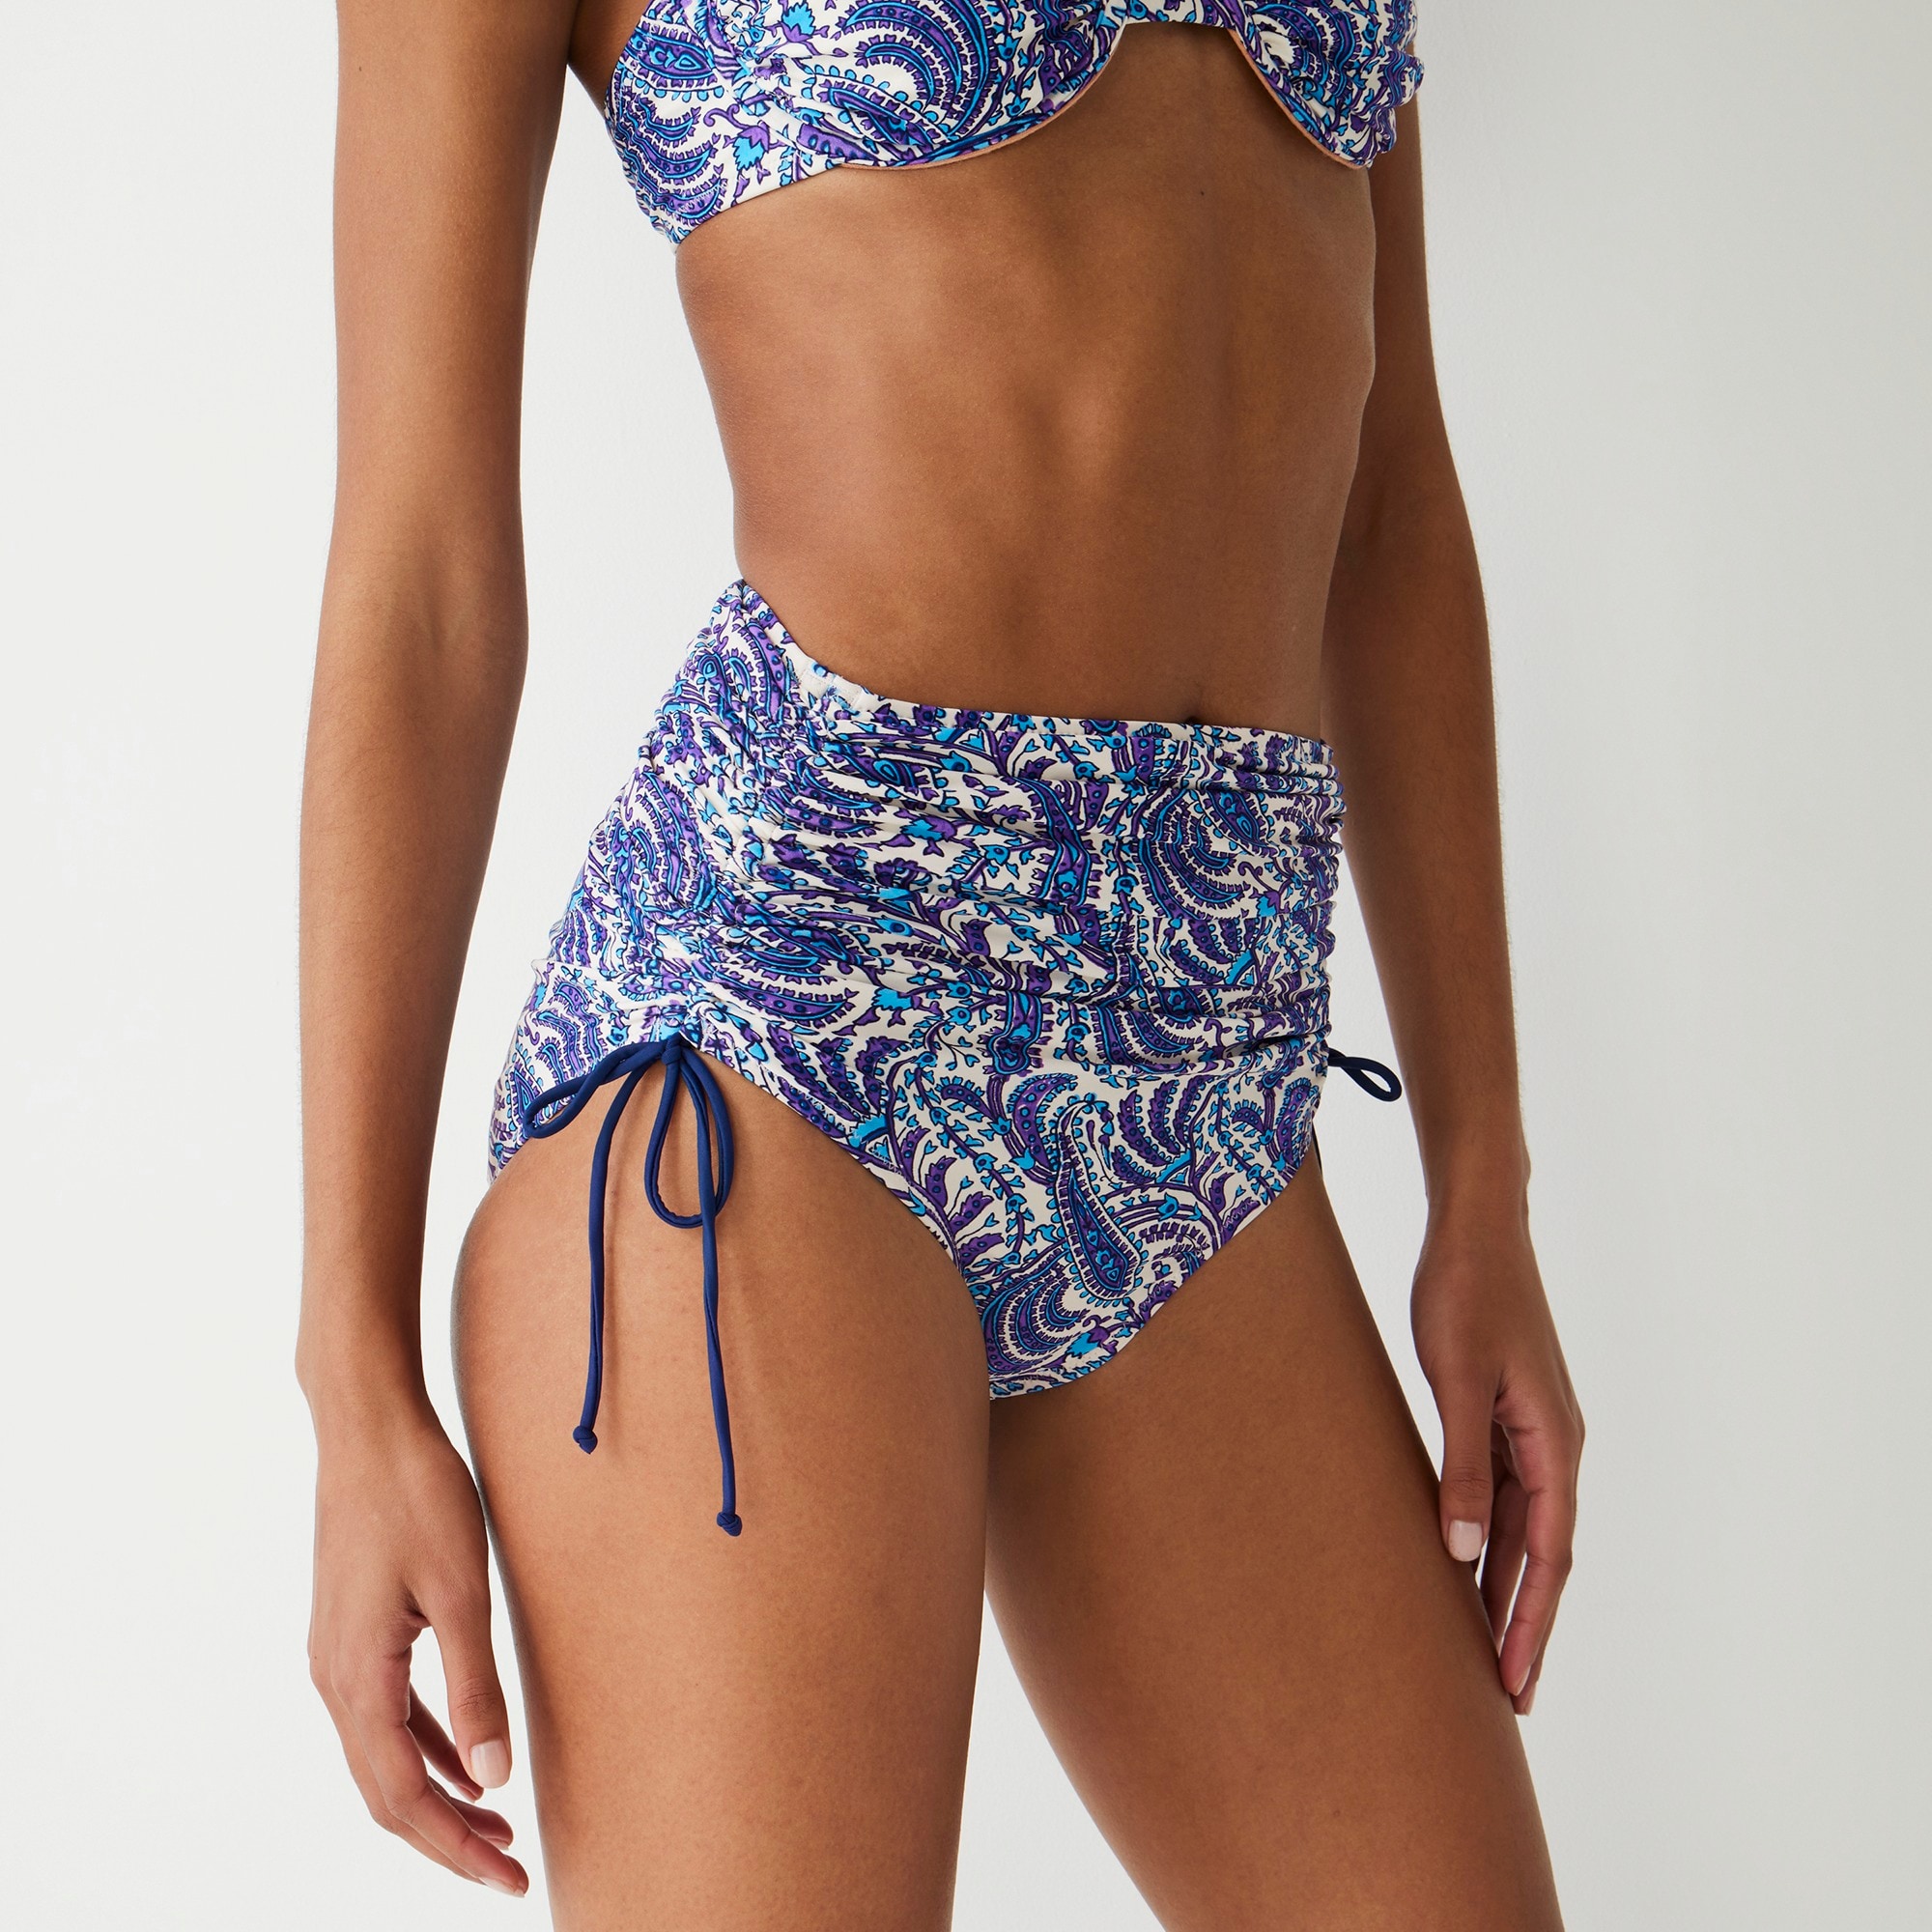 j.crew: ruched high-rise bikini bottom with adjustable side ties in purple paisley for women